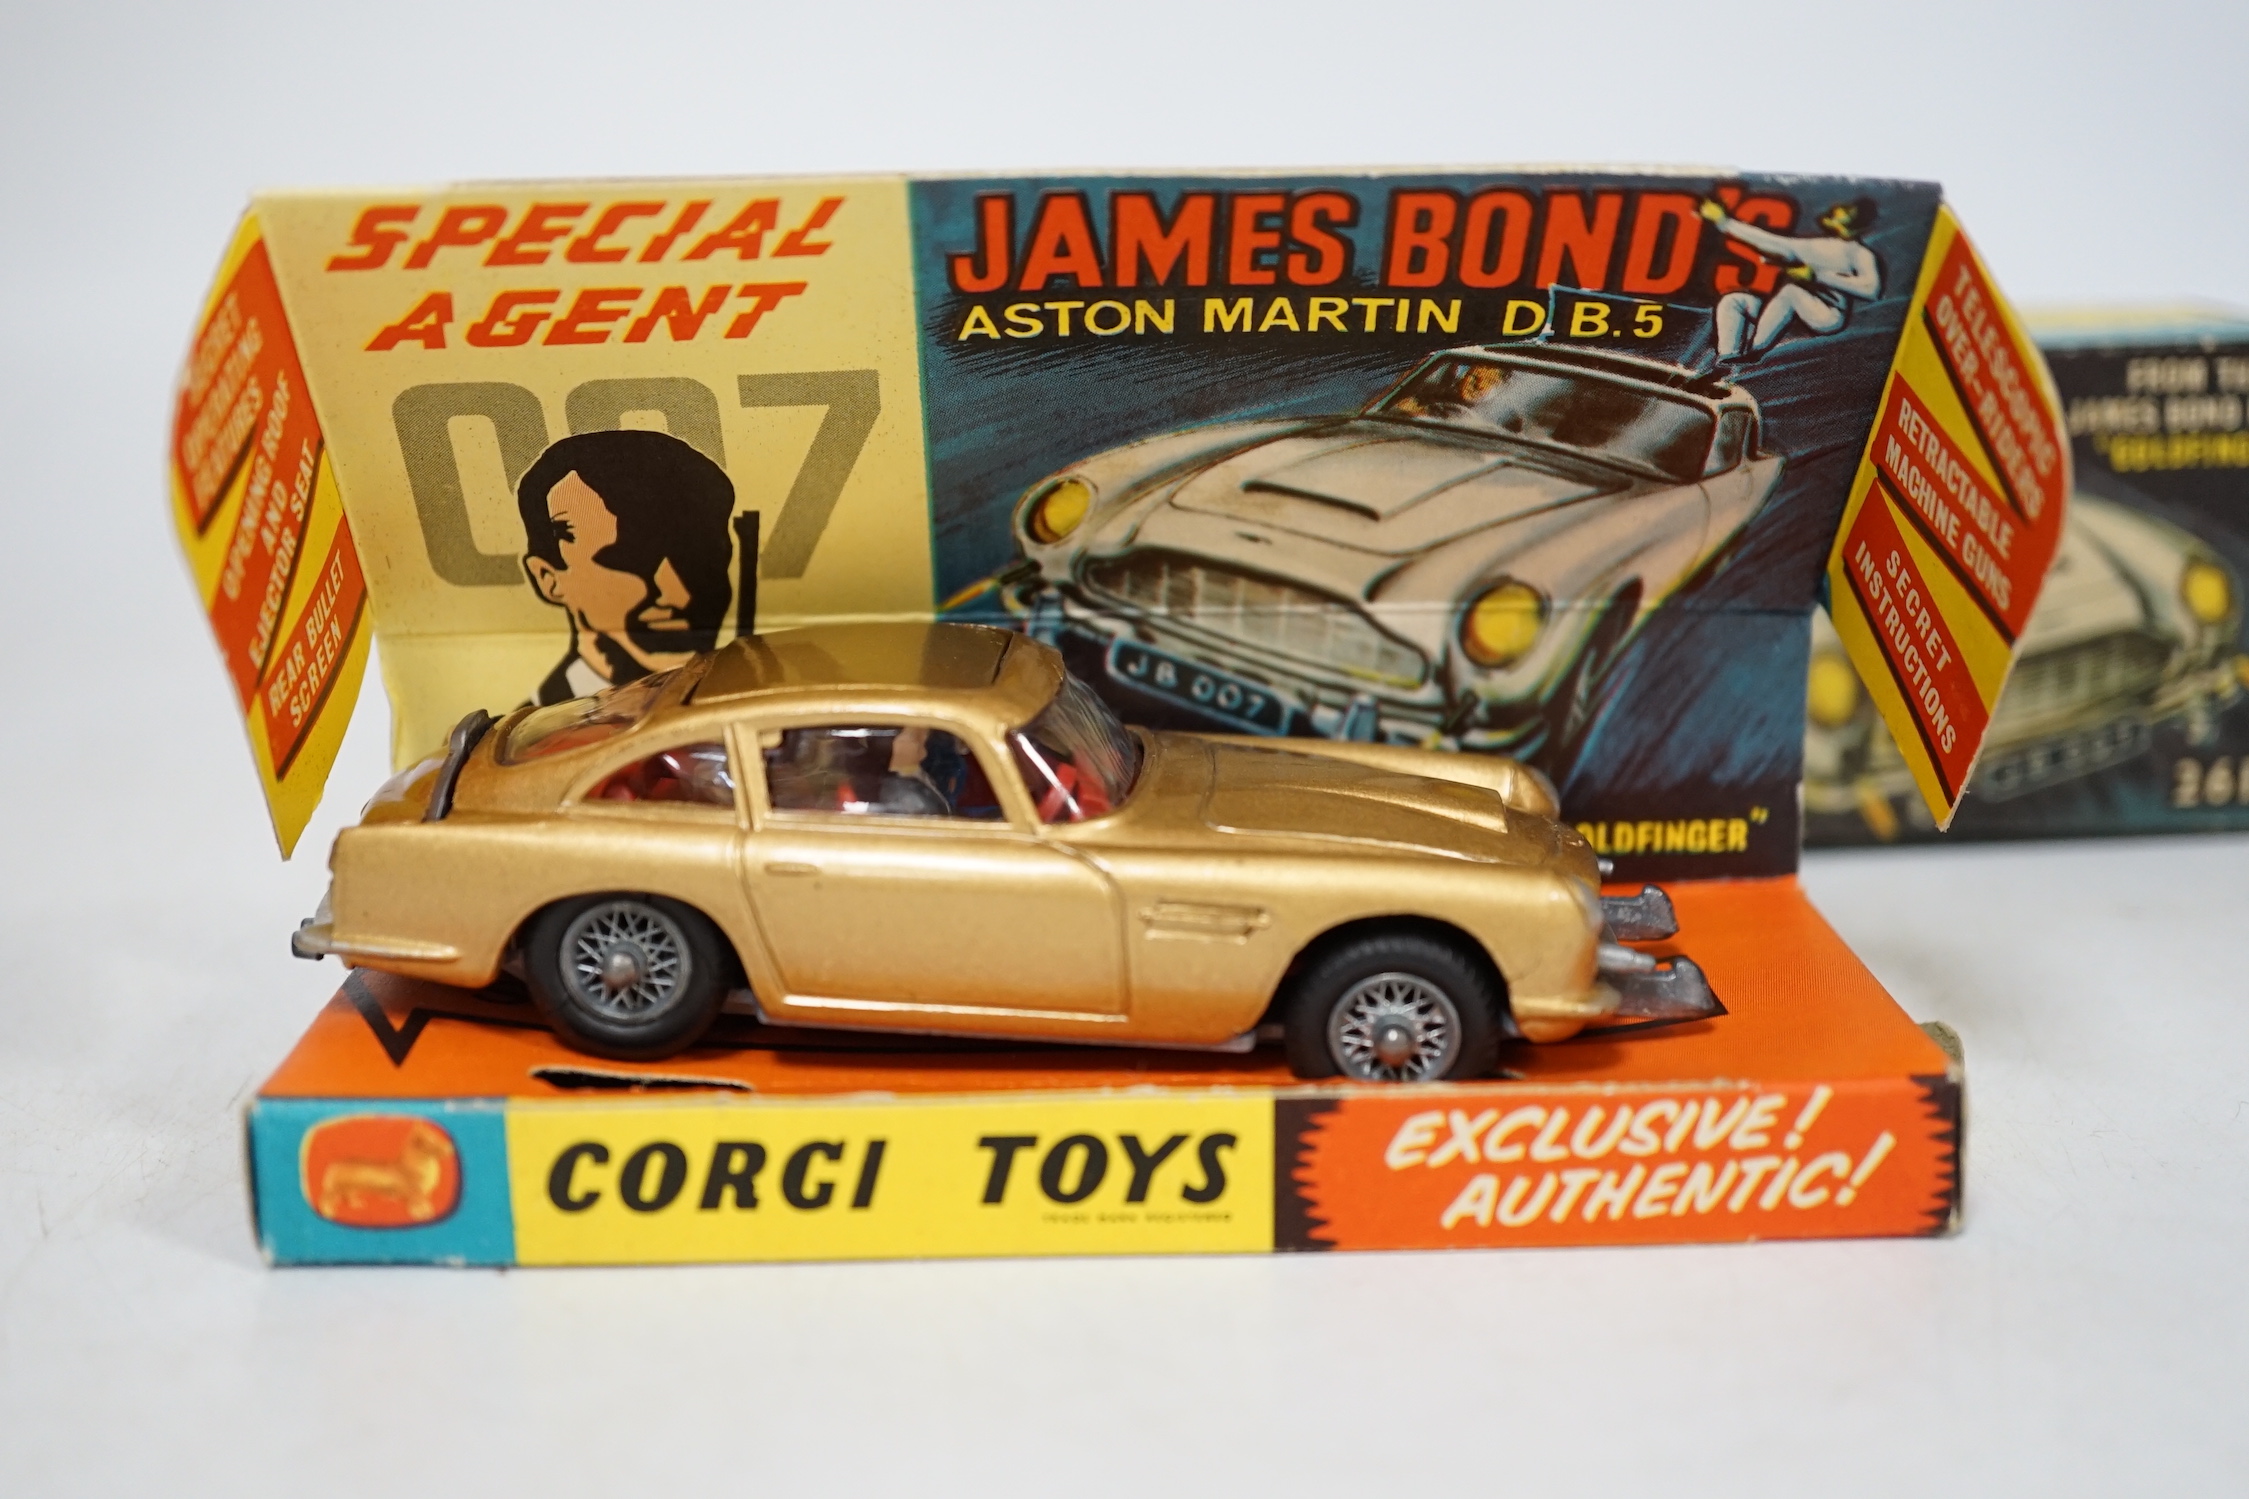 Corgi Toys James Bond's Aston Martin (261) in gold, boxed with driver, passenger, inner display tray, correct leaflet advertising other Corgi models and a ‘Secret Instructions’ envelope containing instructions and unused